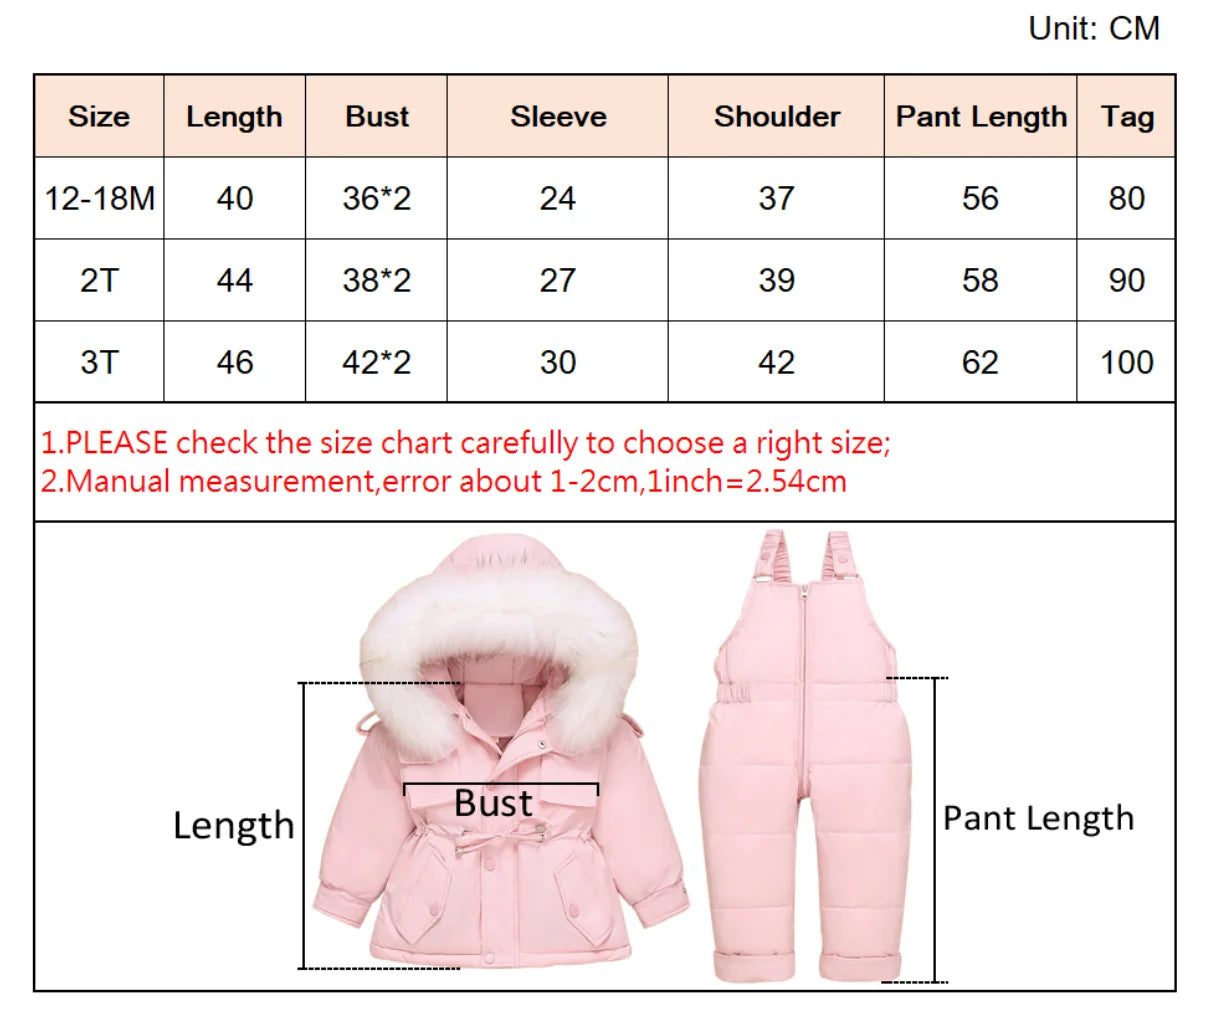 Children Down Coat Jacket+jumpsuit Kids Toddler Girl Boy Clothes Down 2pcs Winter Outfit Suit Warm Baby Overalls Clothing Sets-Dollar Bargains Online Shopping Australia